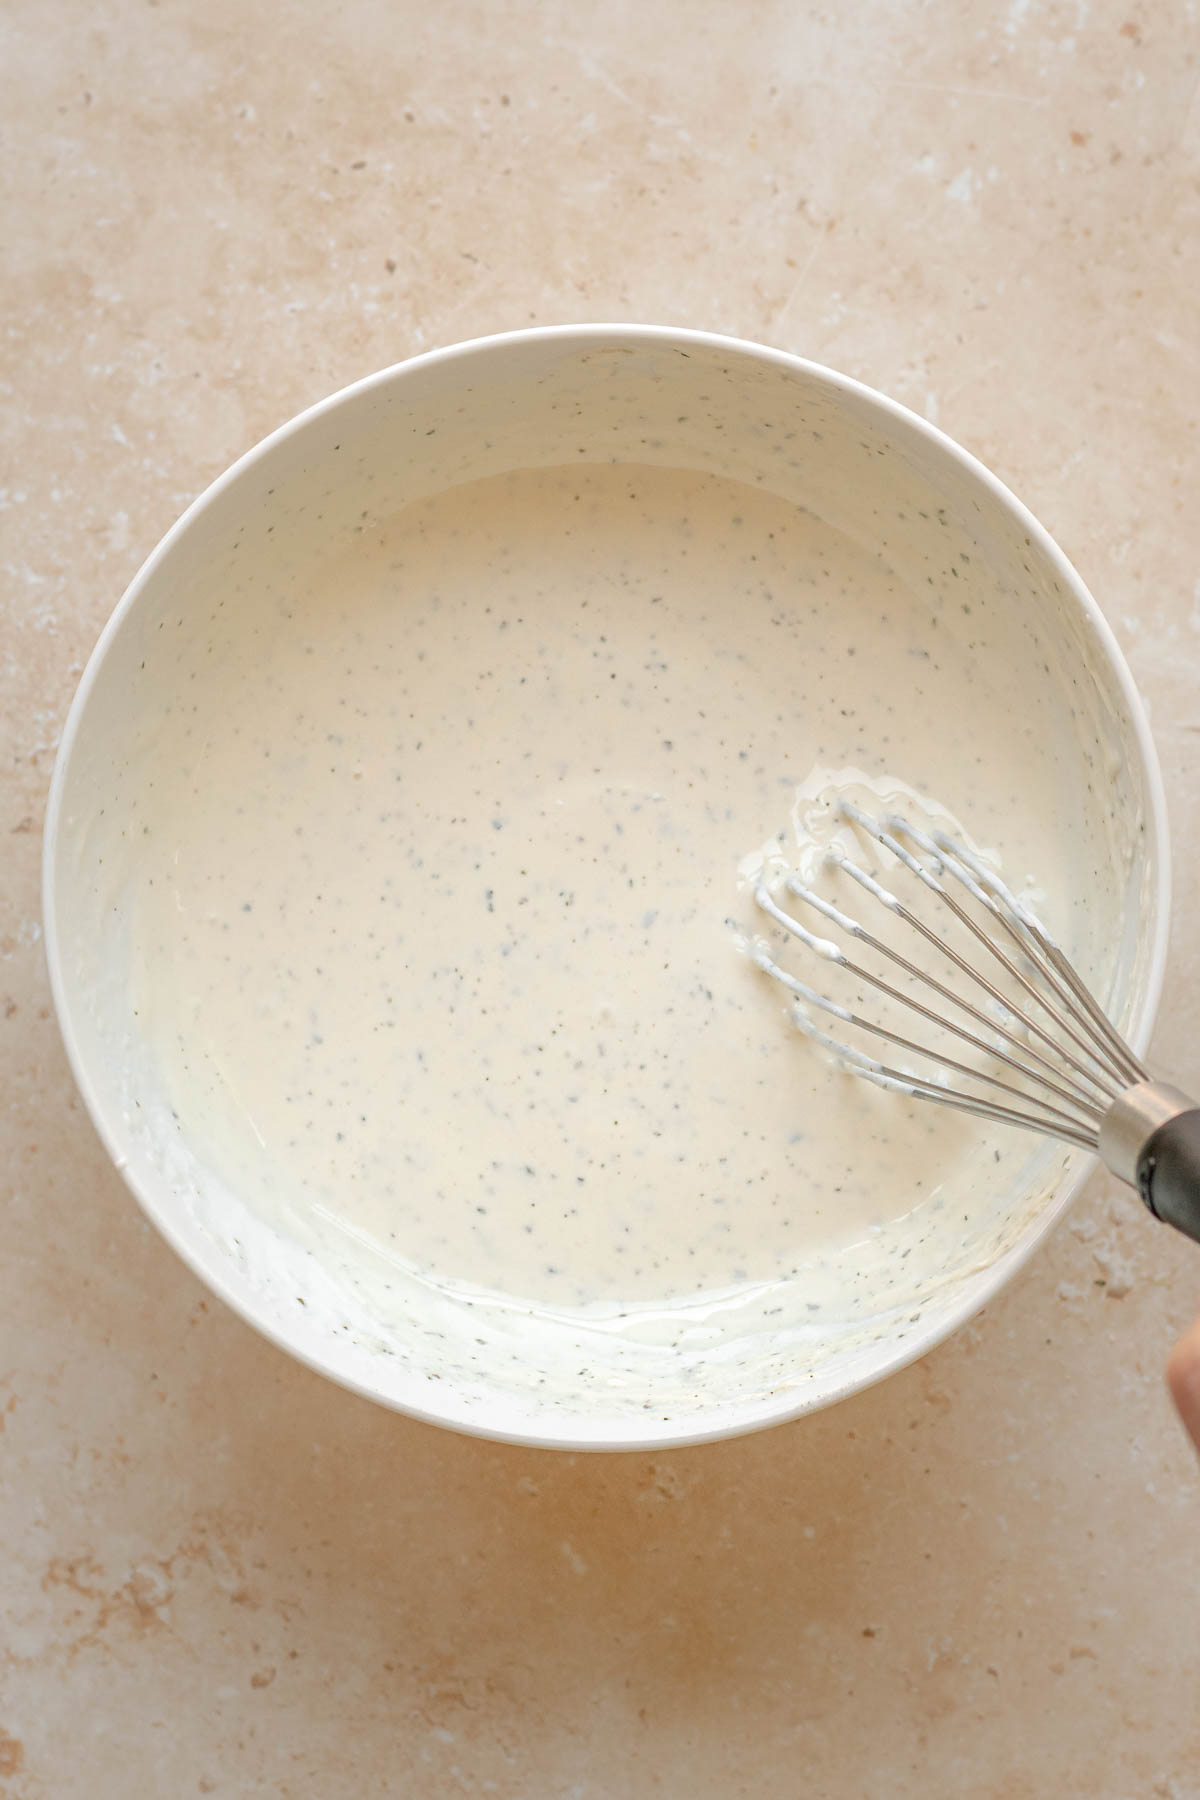 A whisk mixes ranch dip in a bowl.